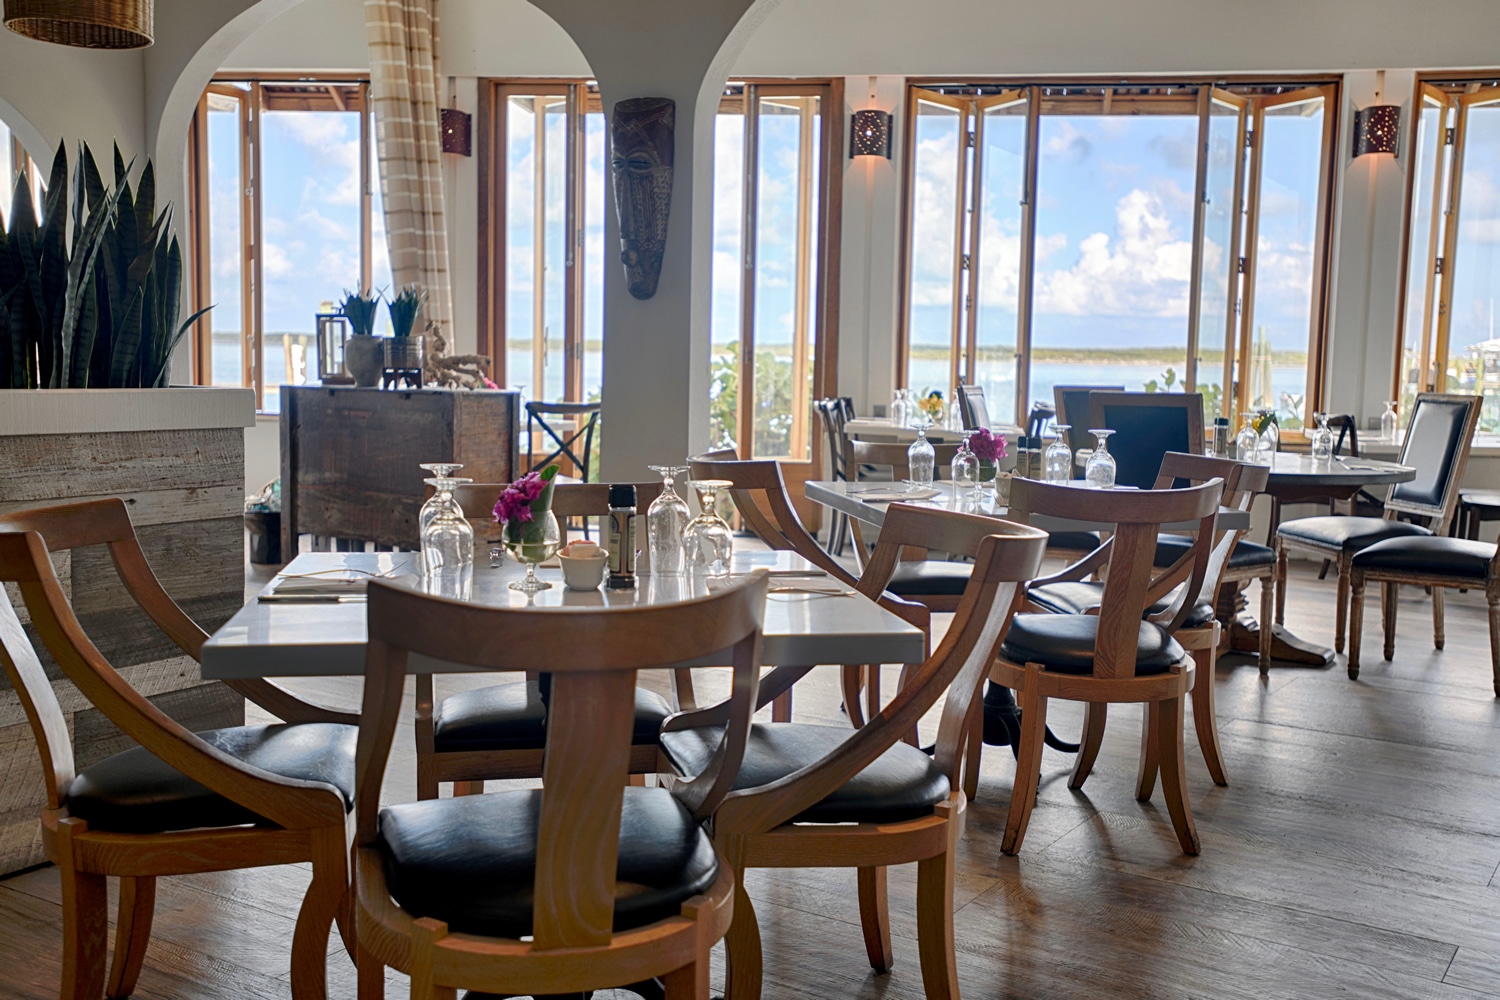 Staniel Cay Yacht Club - A restaurant with a view of the ocean nestled in The Bahamas.